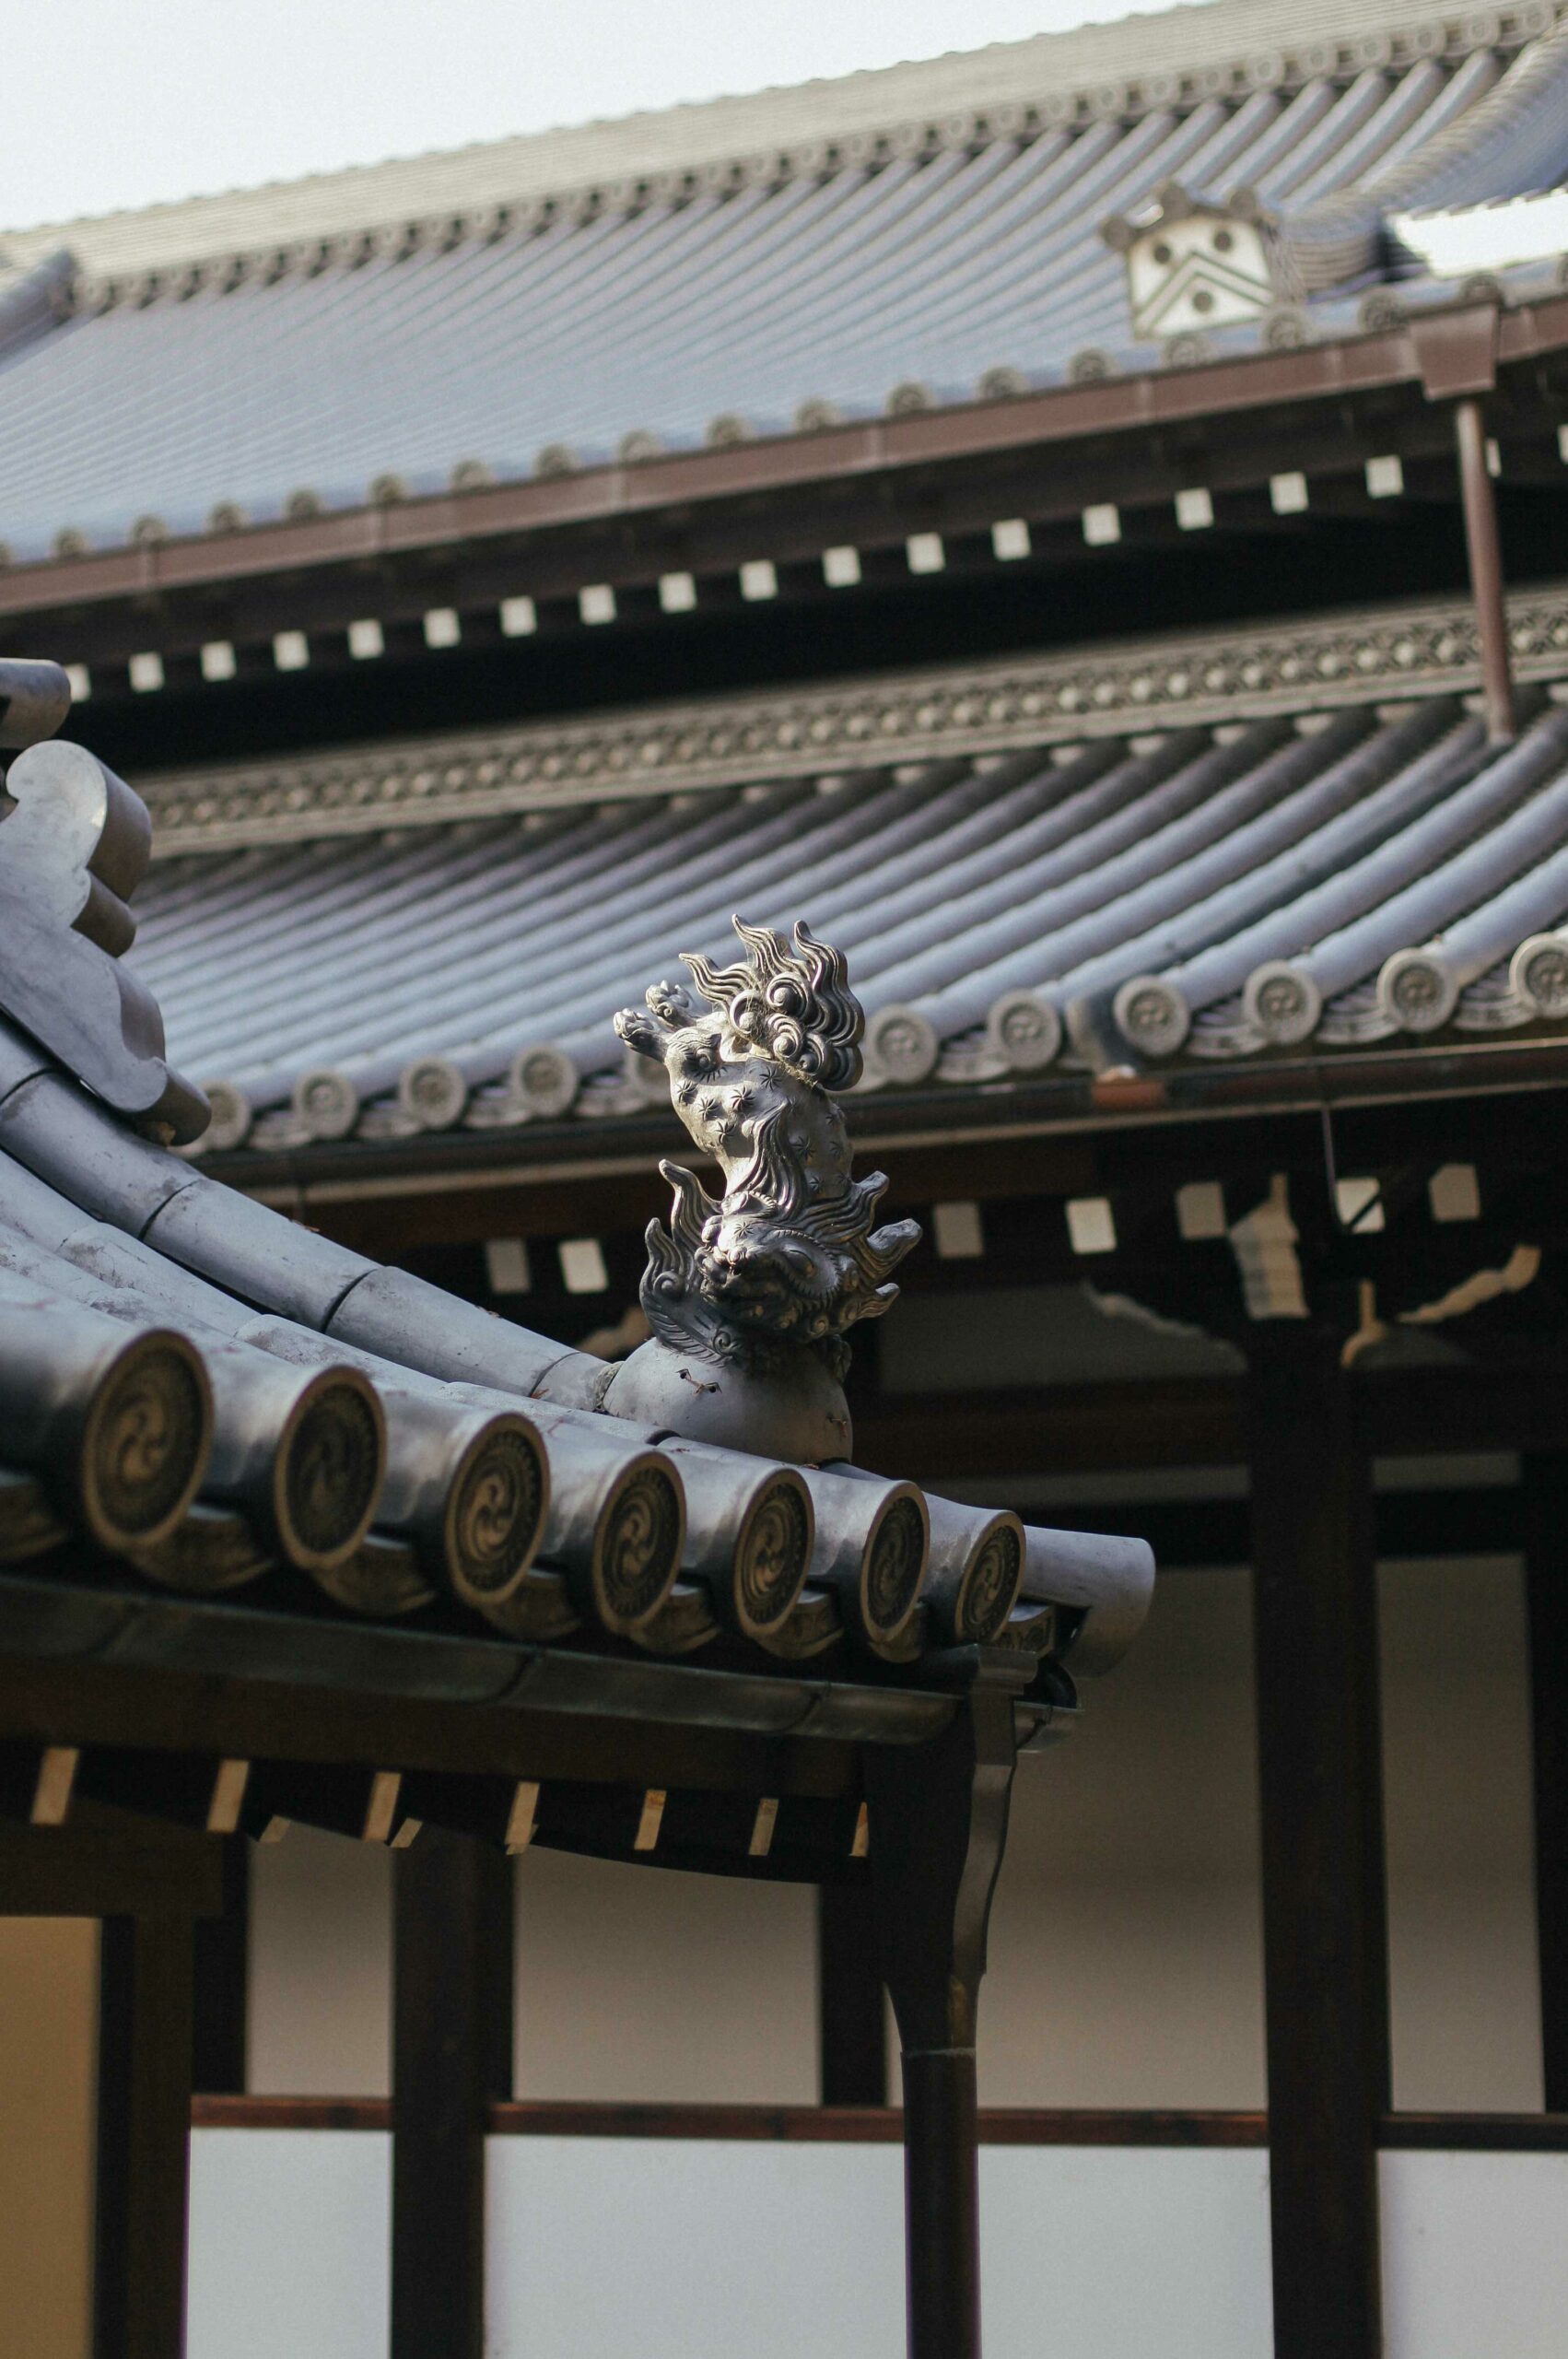 Flying lion-dogs adorn the roof corners at Nishi, offering protection from malevolent spirits.